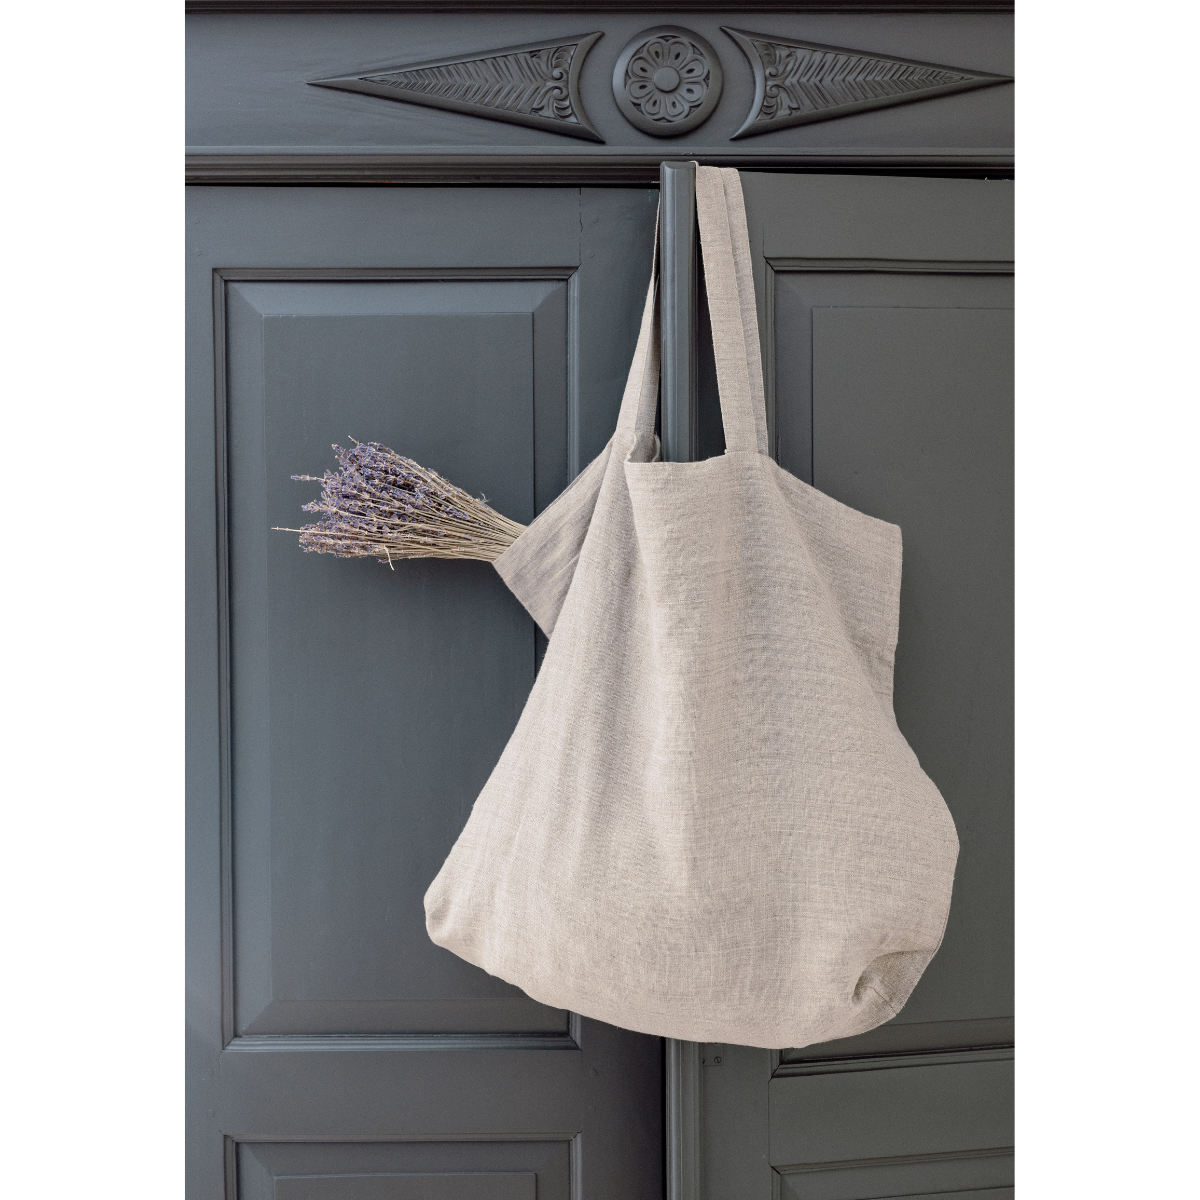 Natural Linen Tote